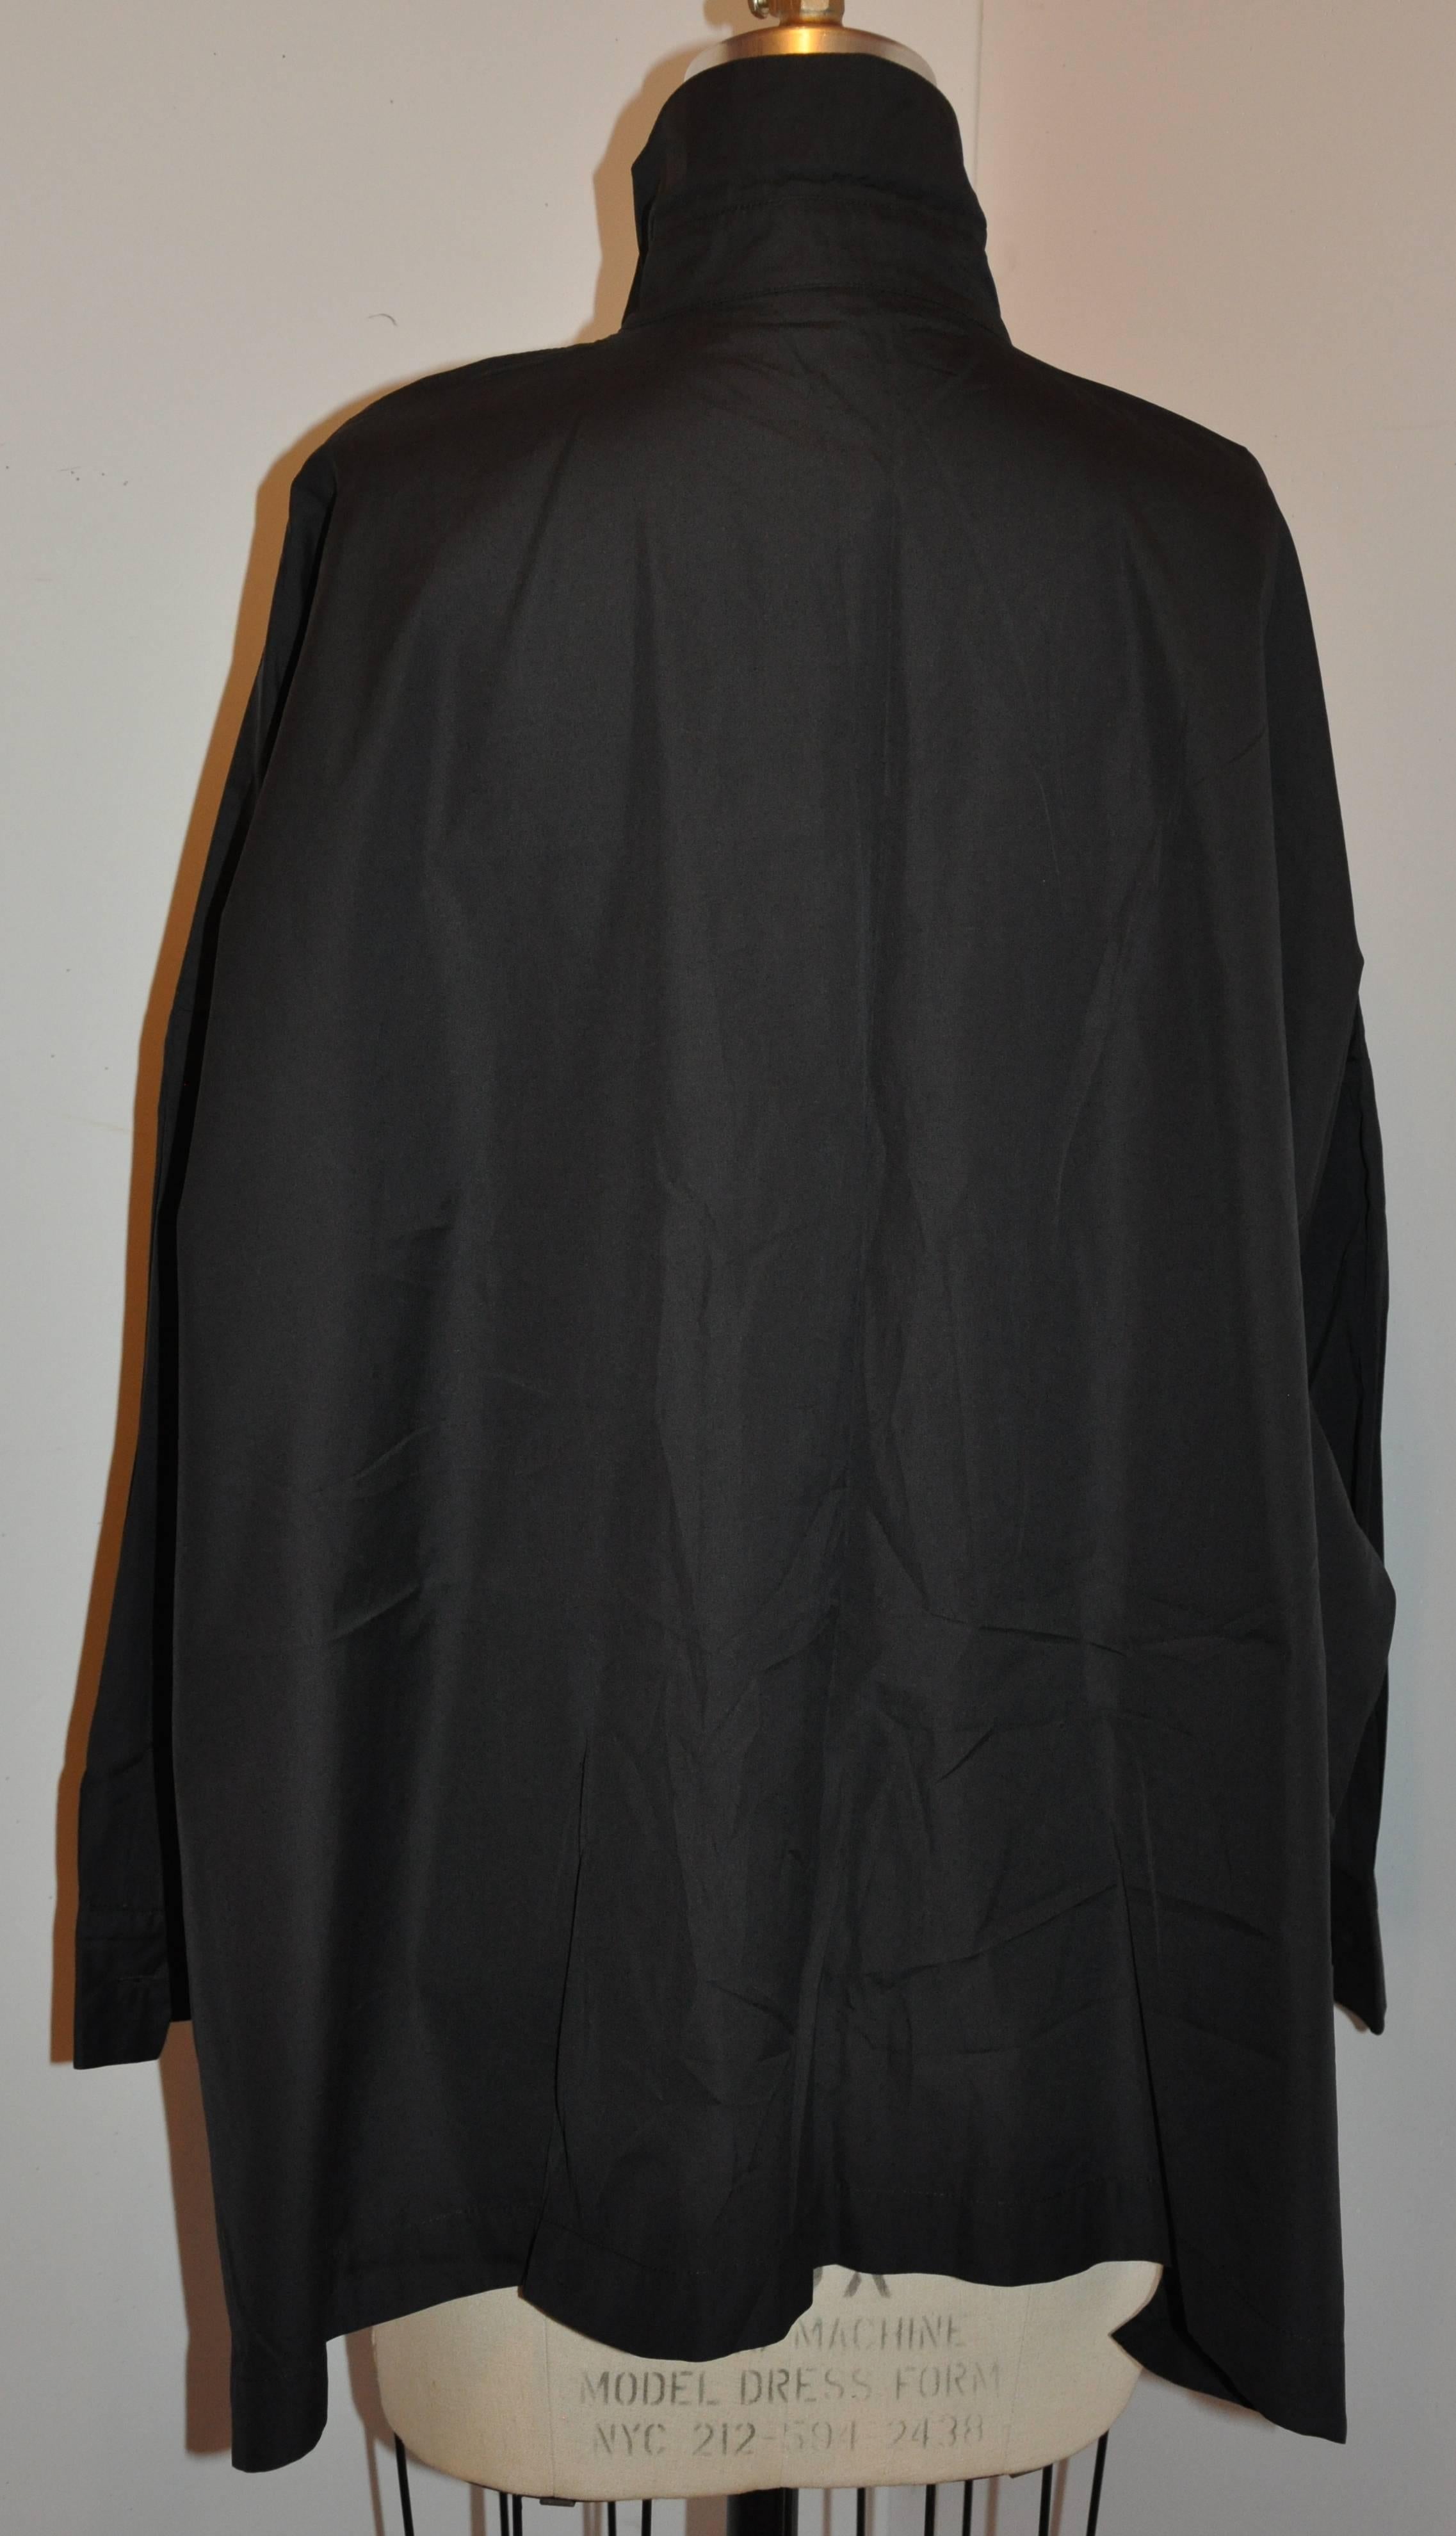         Eskandar for Bergdorf Goodman oversize black cotton smock-style jacket is detailed with two front patch pockets. The front has six buttons in matching black. The sides has slits.
        The total length measures 26 1/4